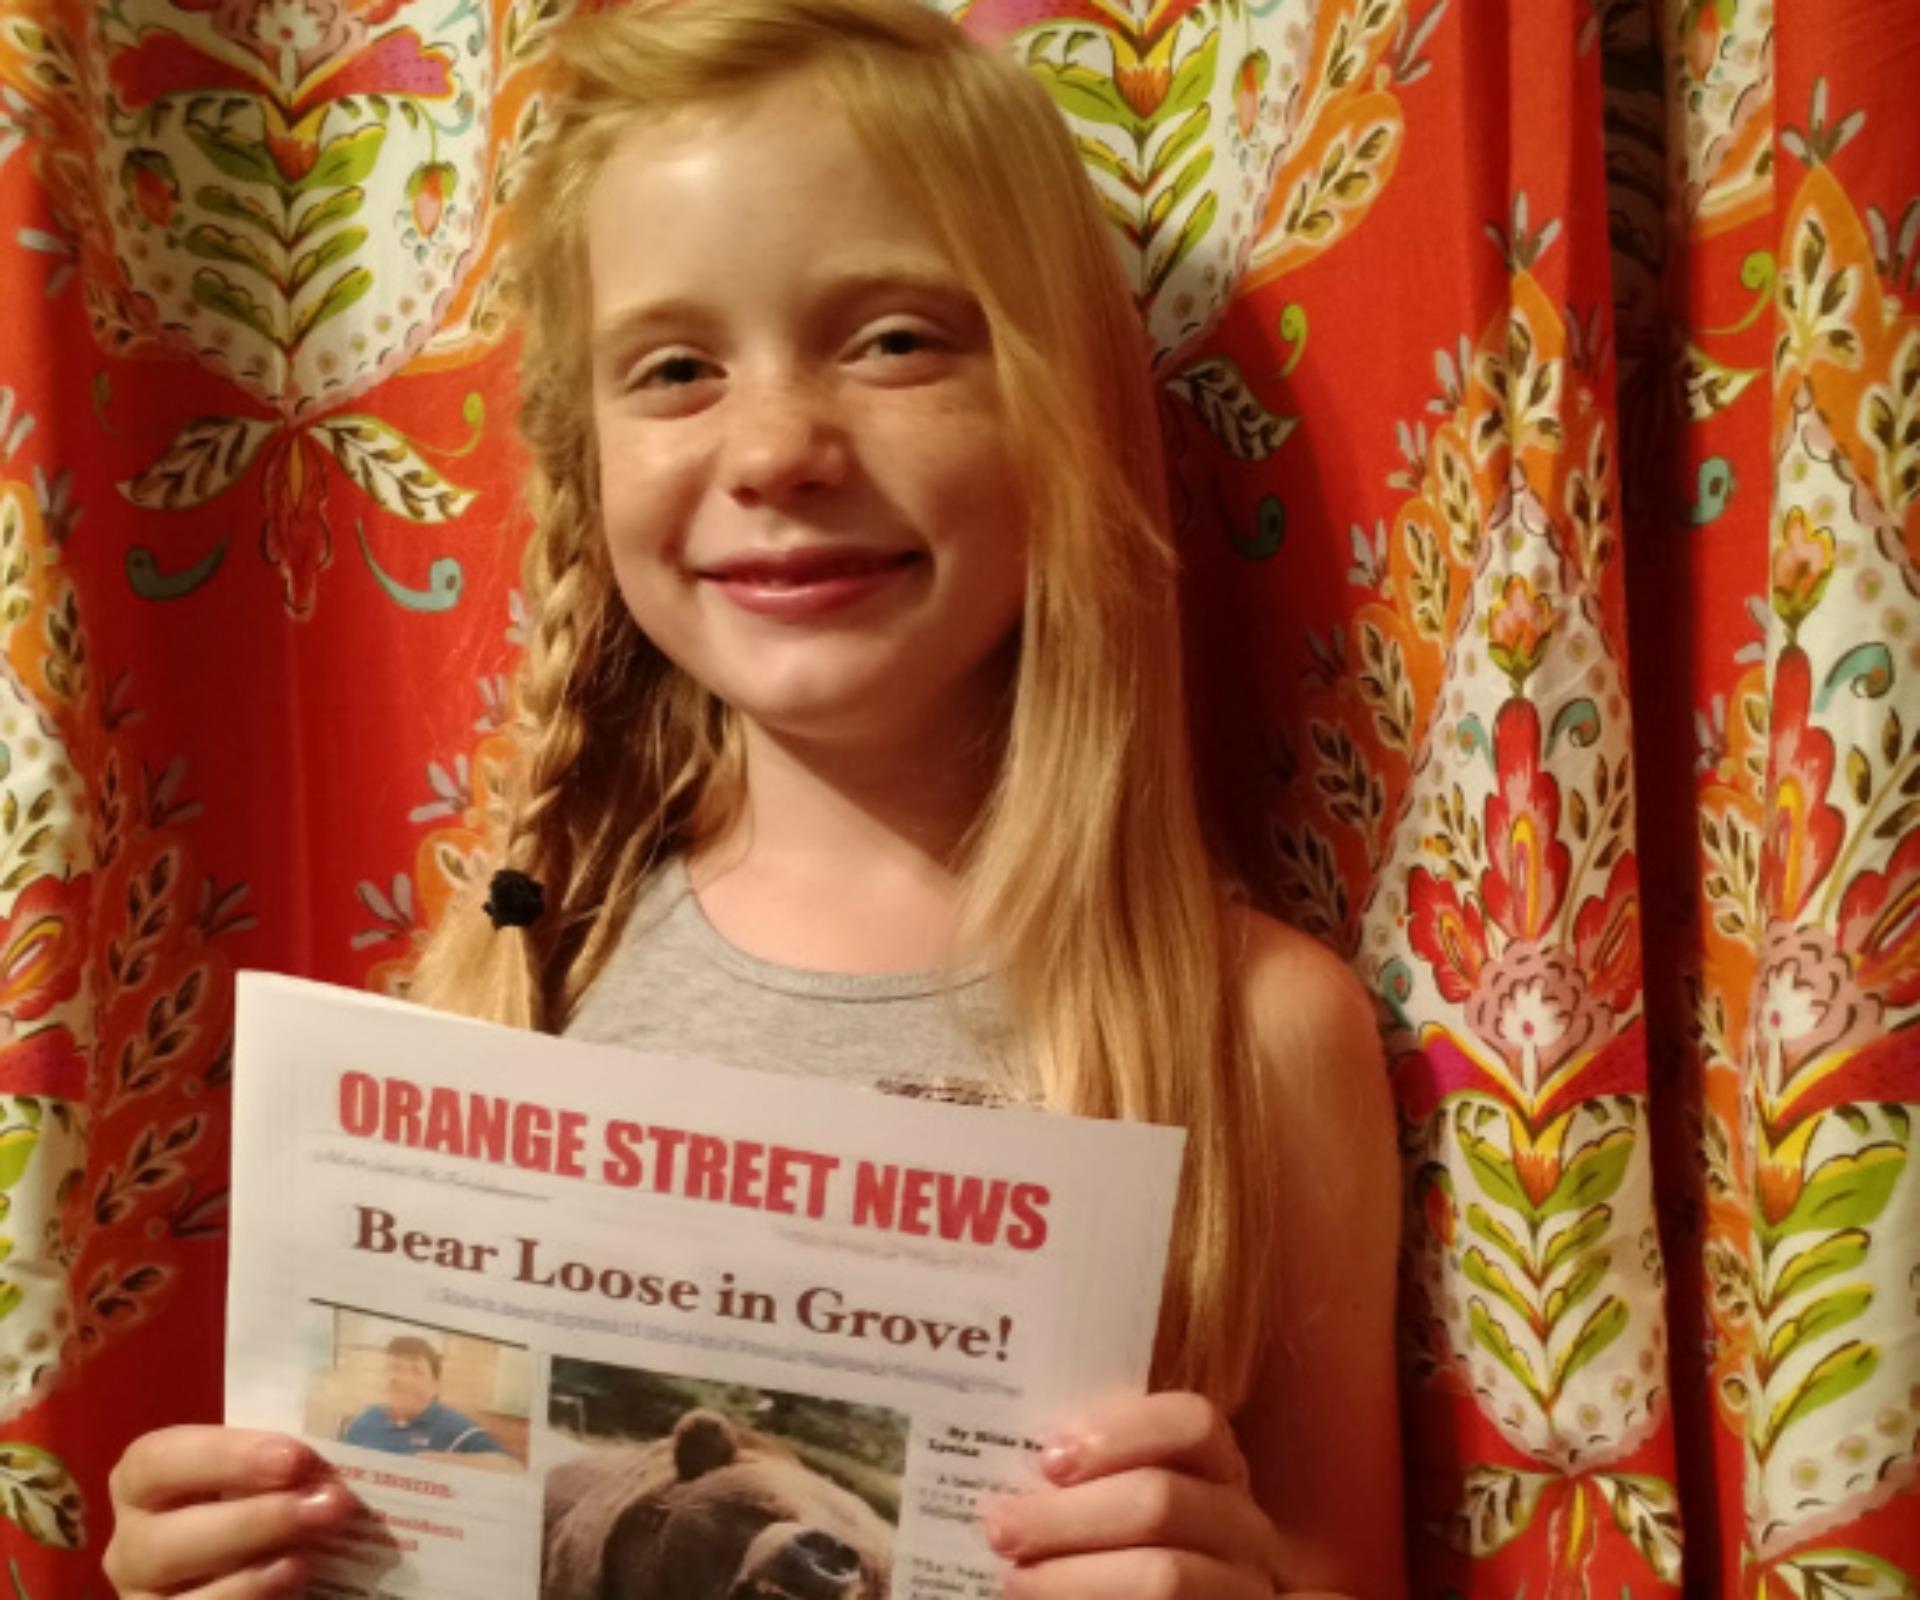 Should a nine-year-old be reporting on murder?